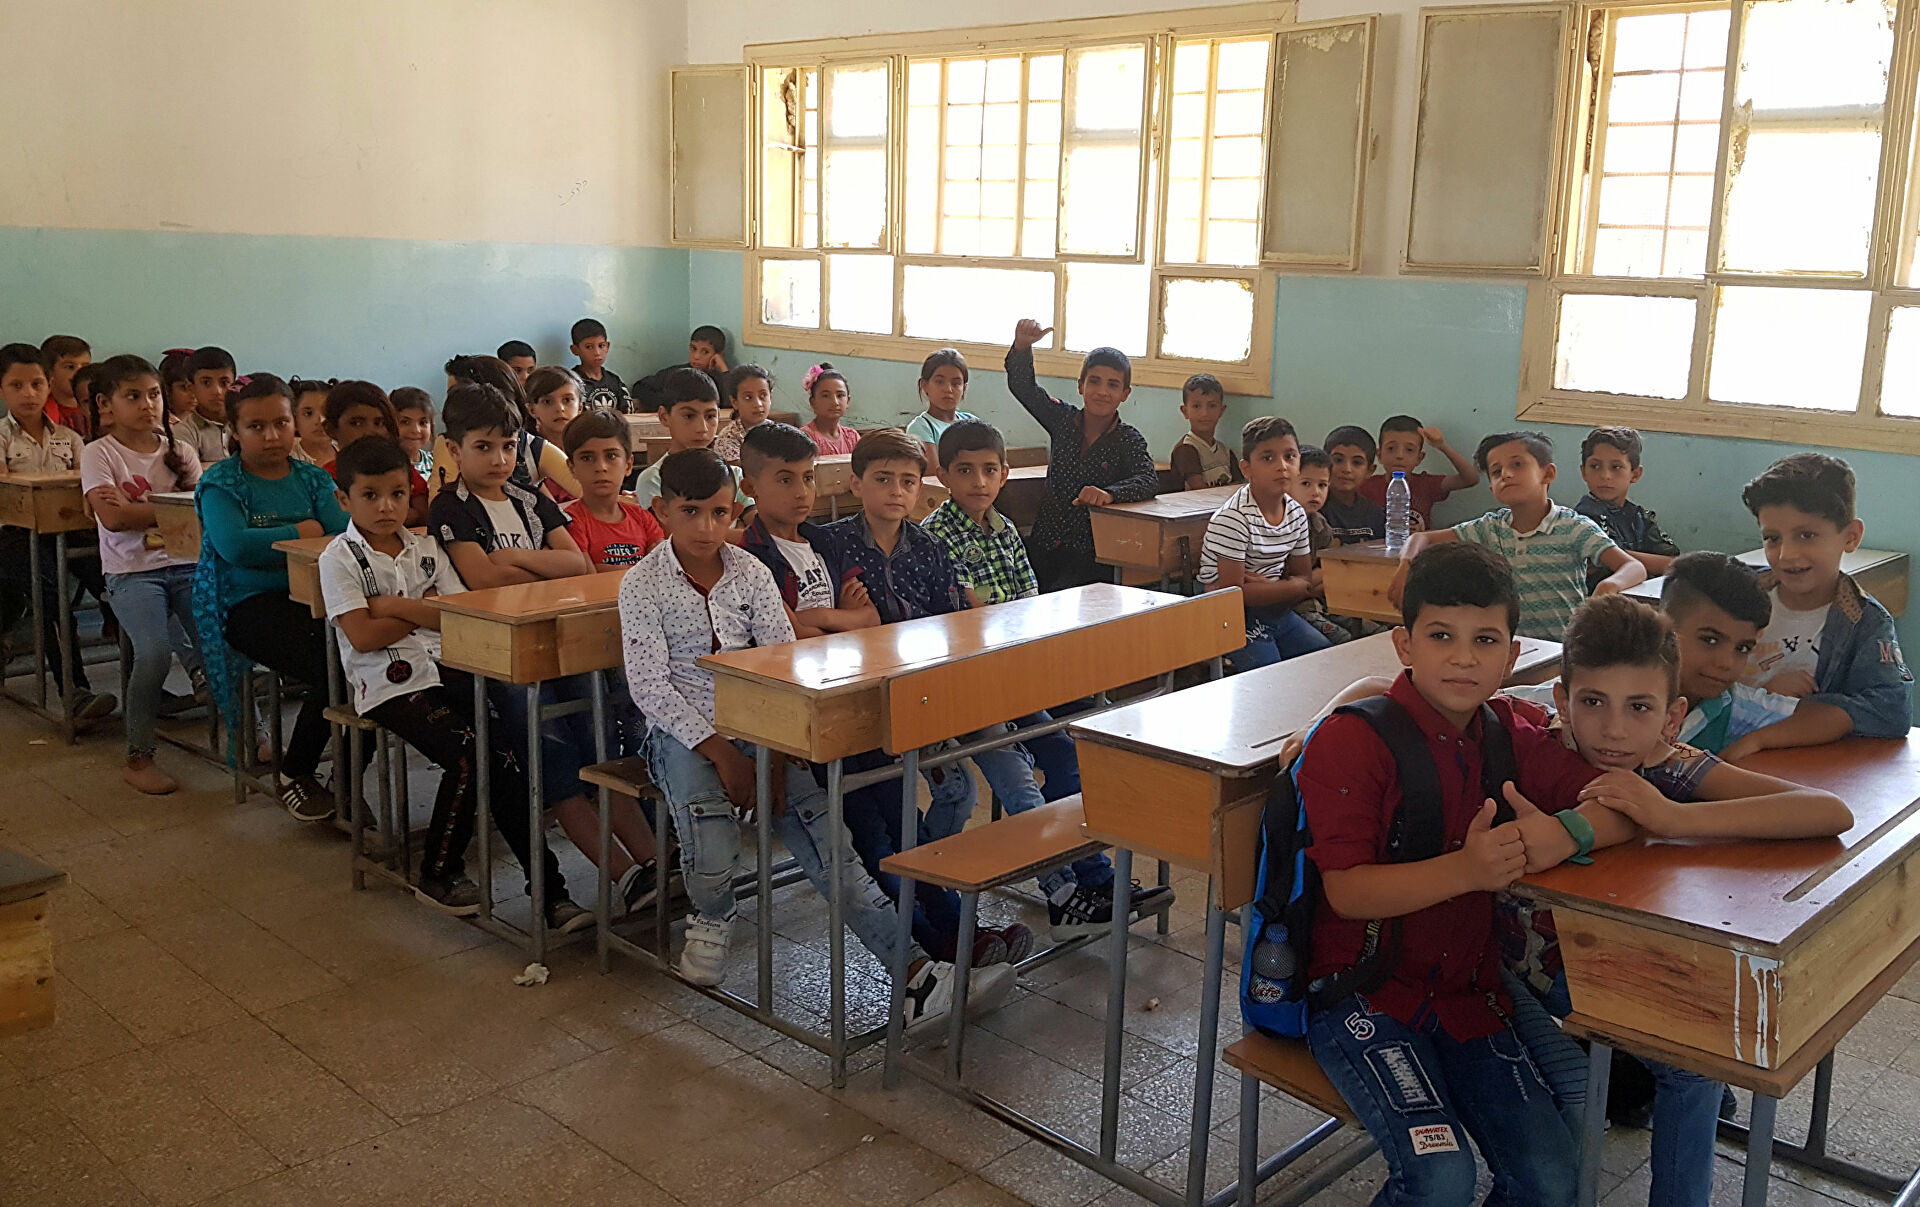 Education: More than a Million Drop-outs in Syria Last 10 Years